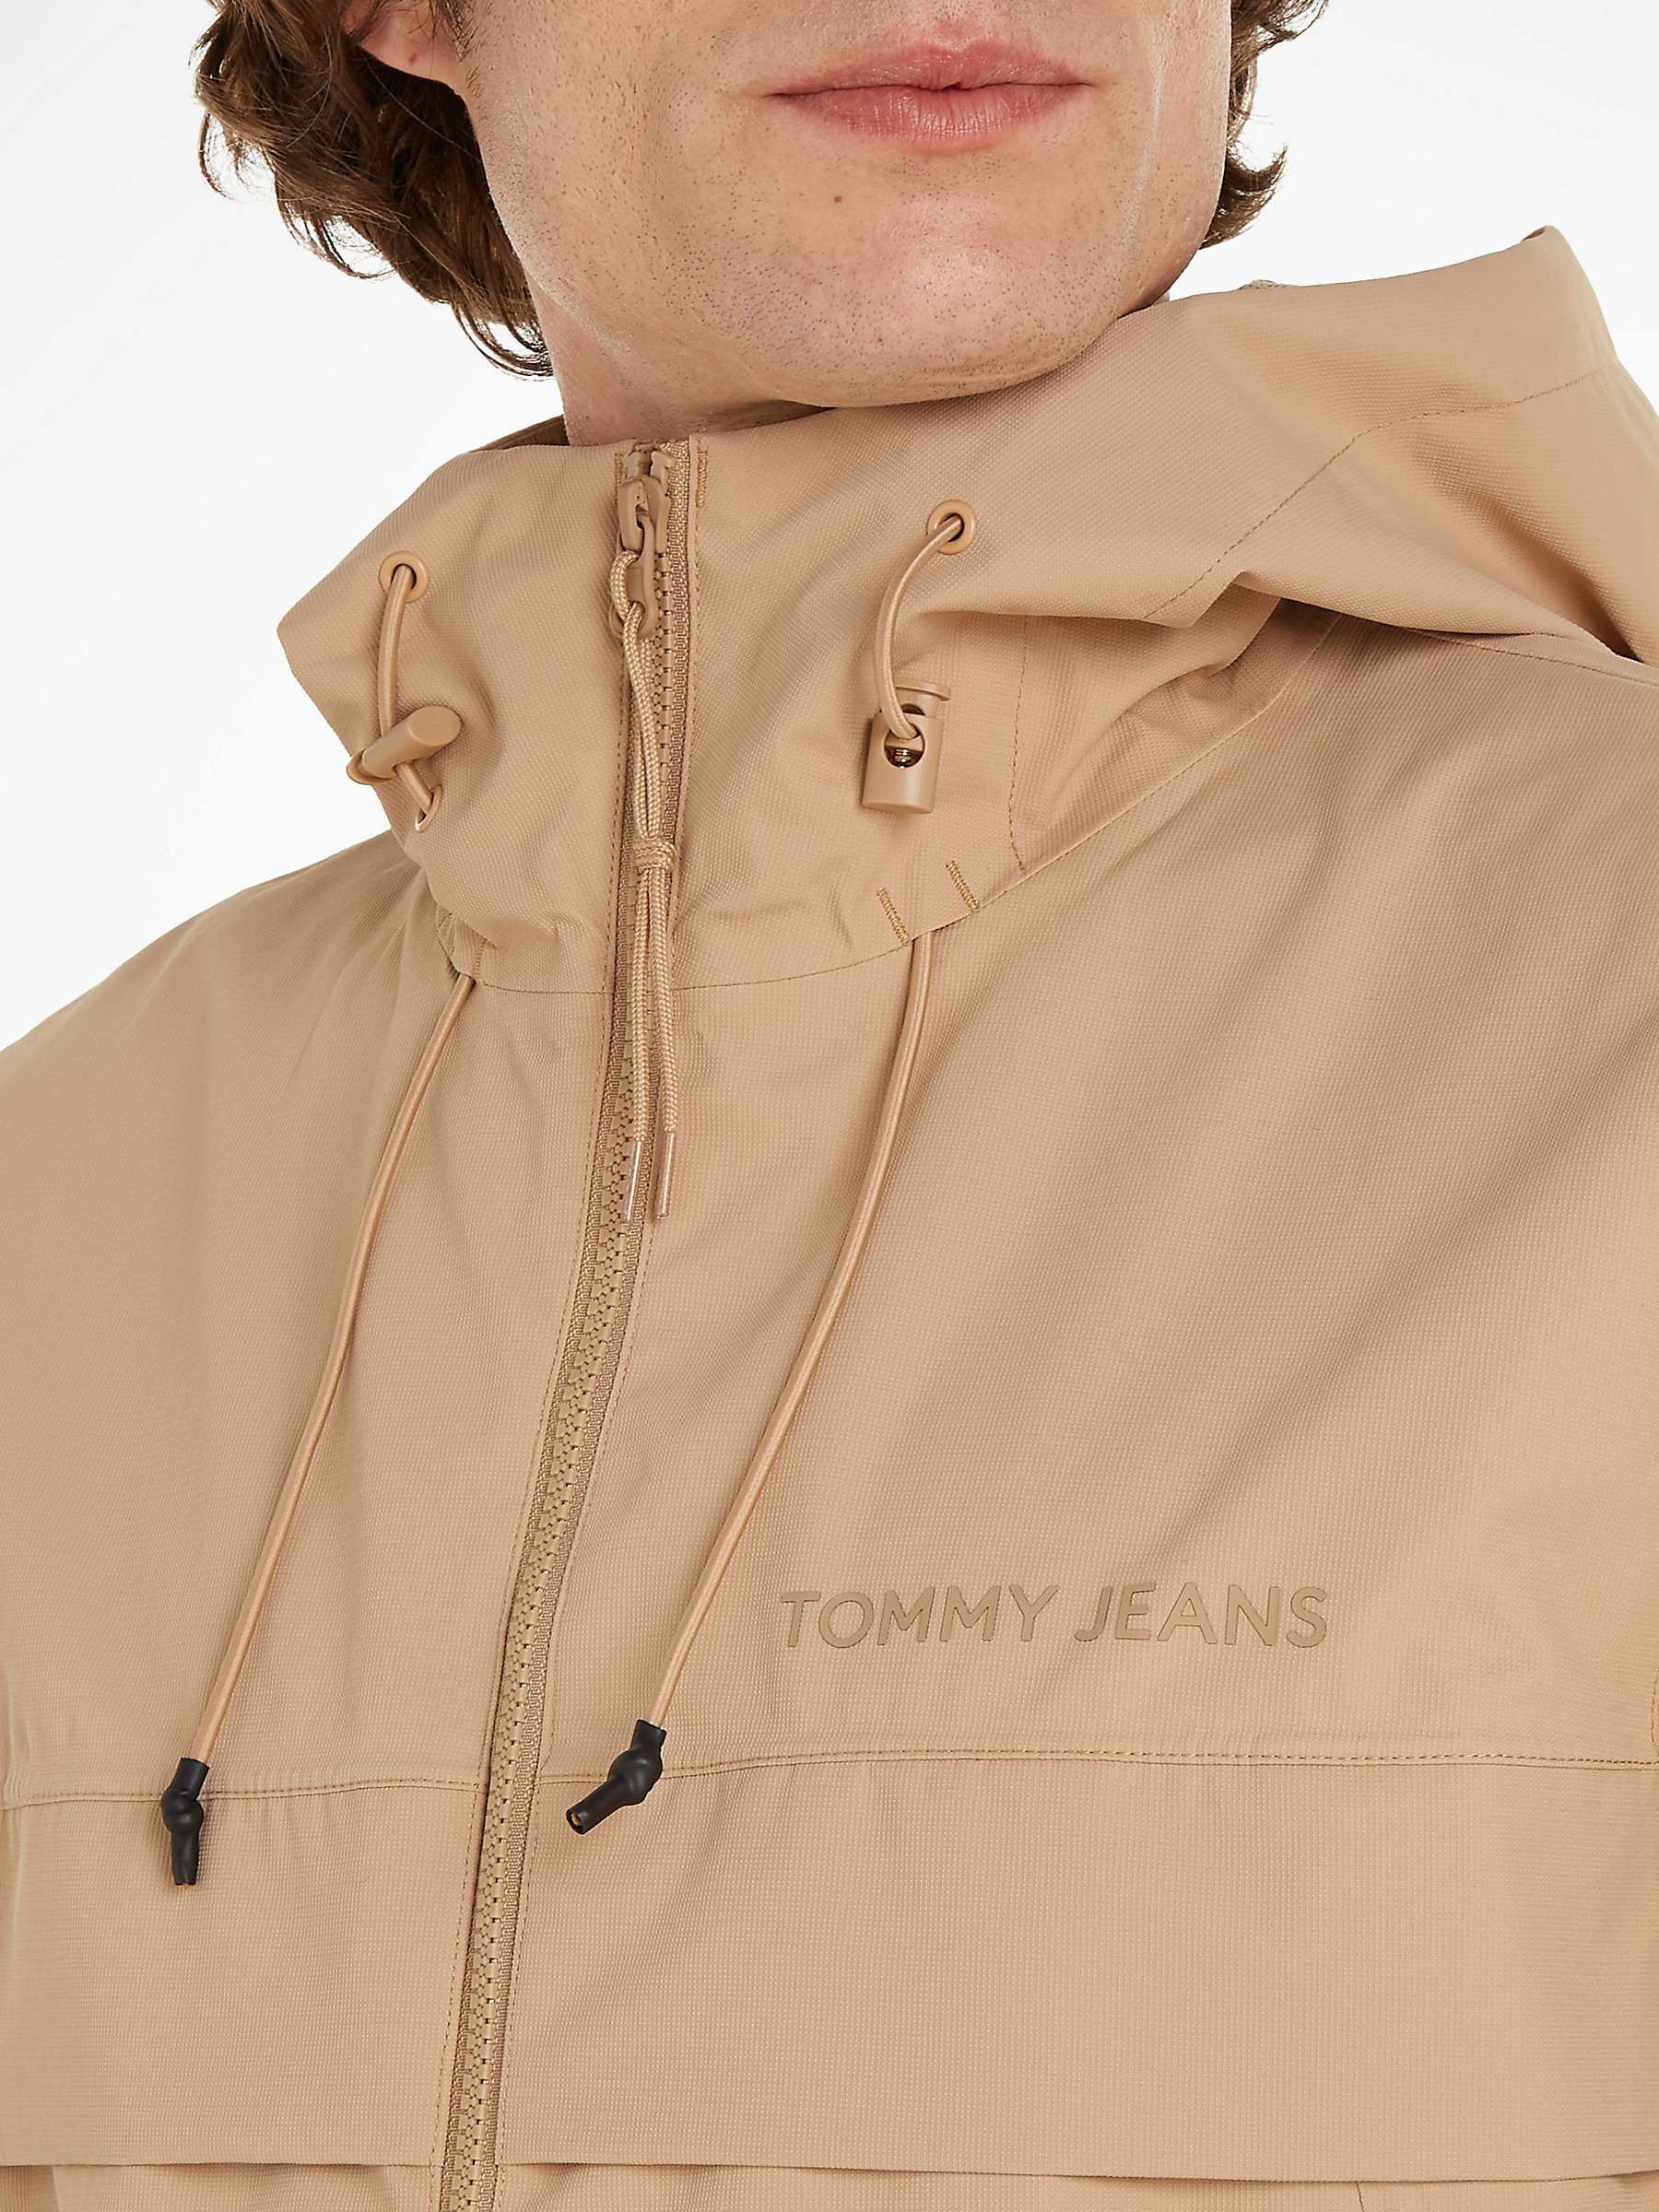 Buy Tommy Jeans Tech Outdoor Chicago Jacket Online at johnlewis.com